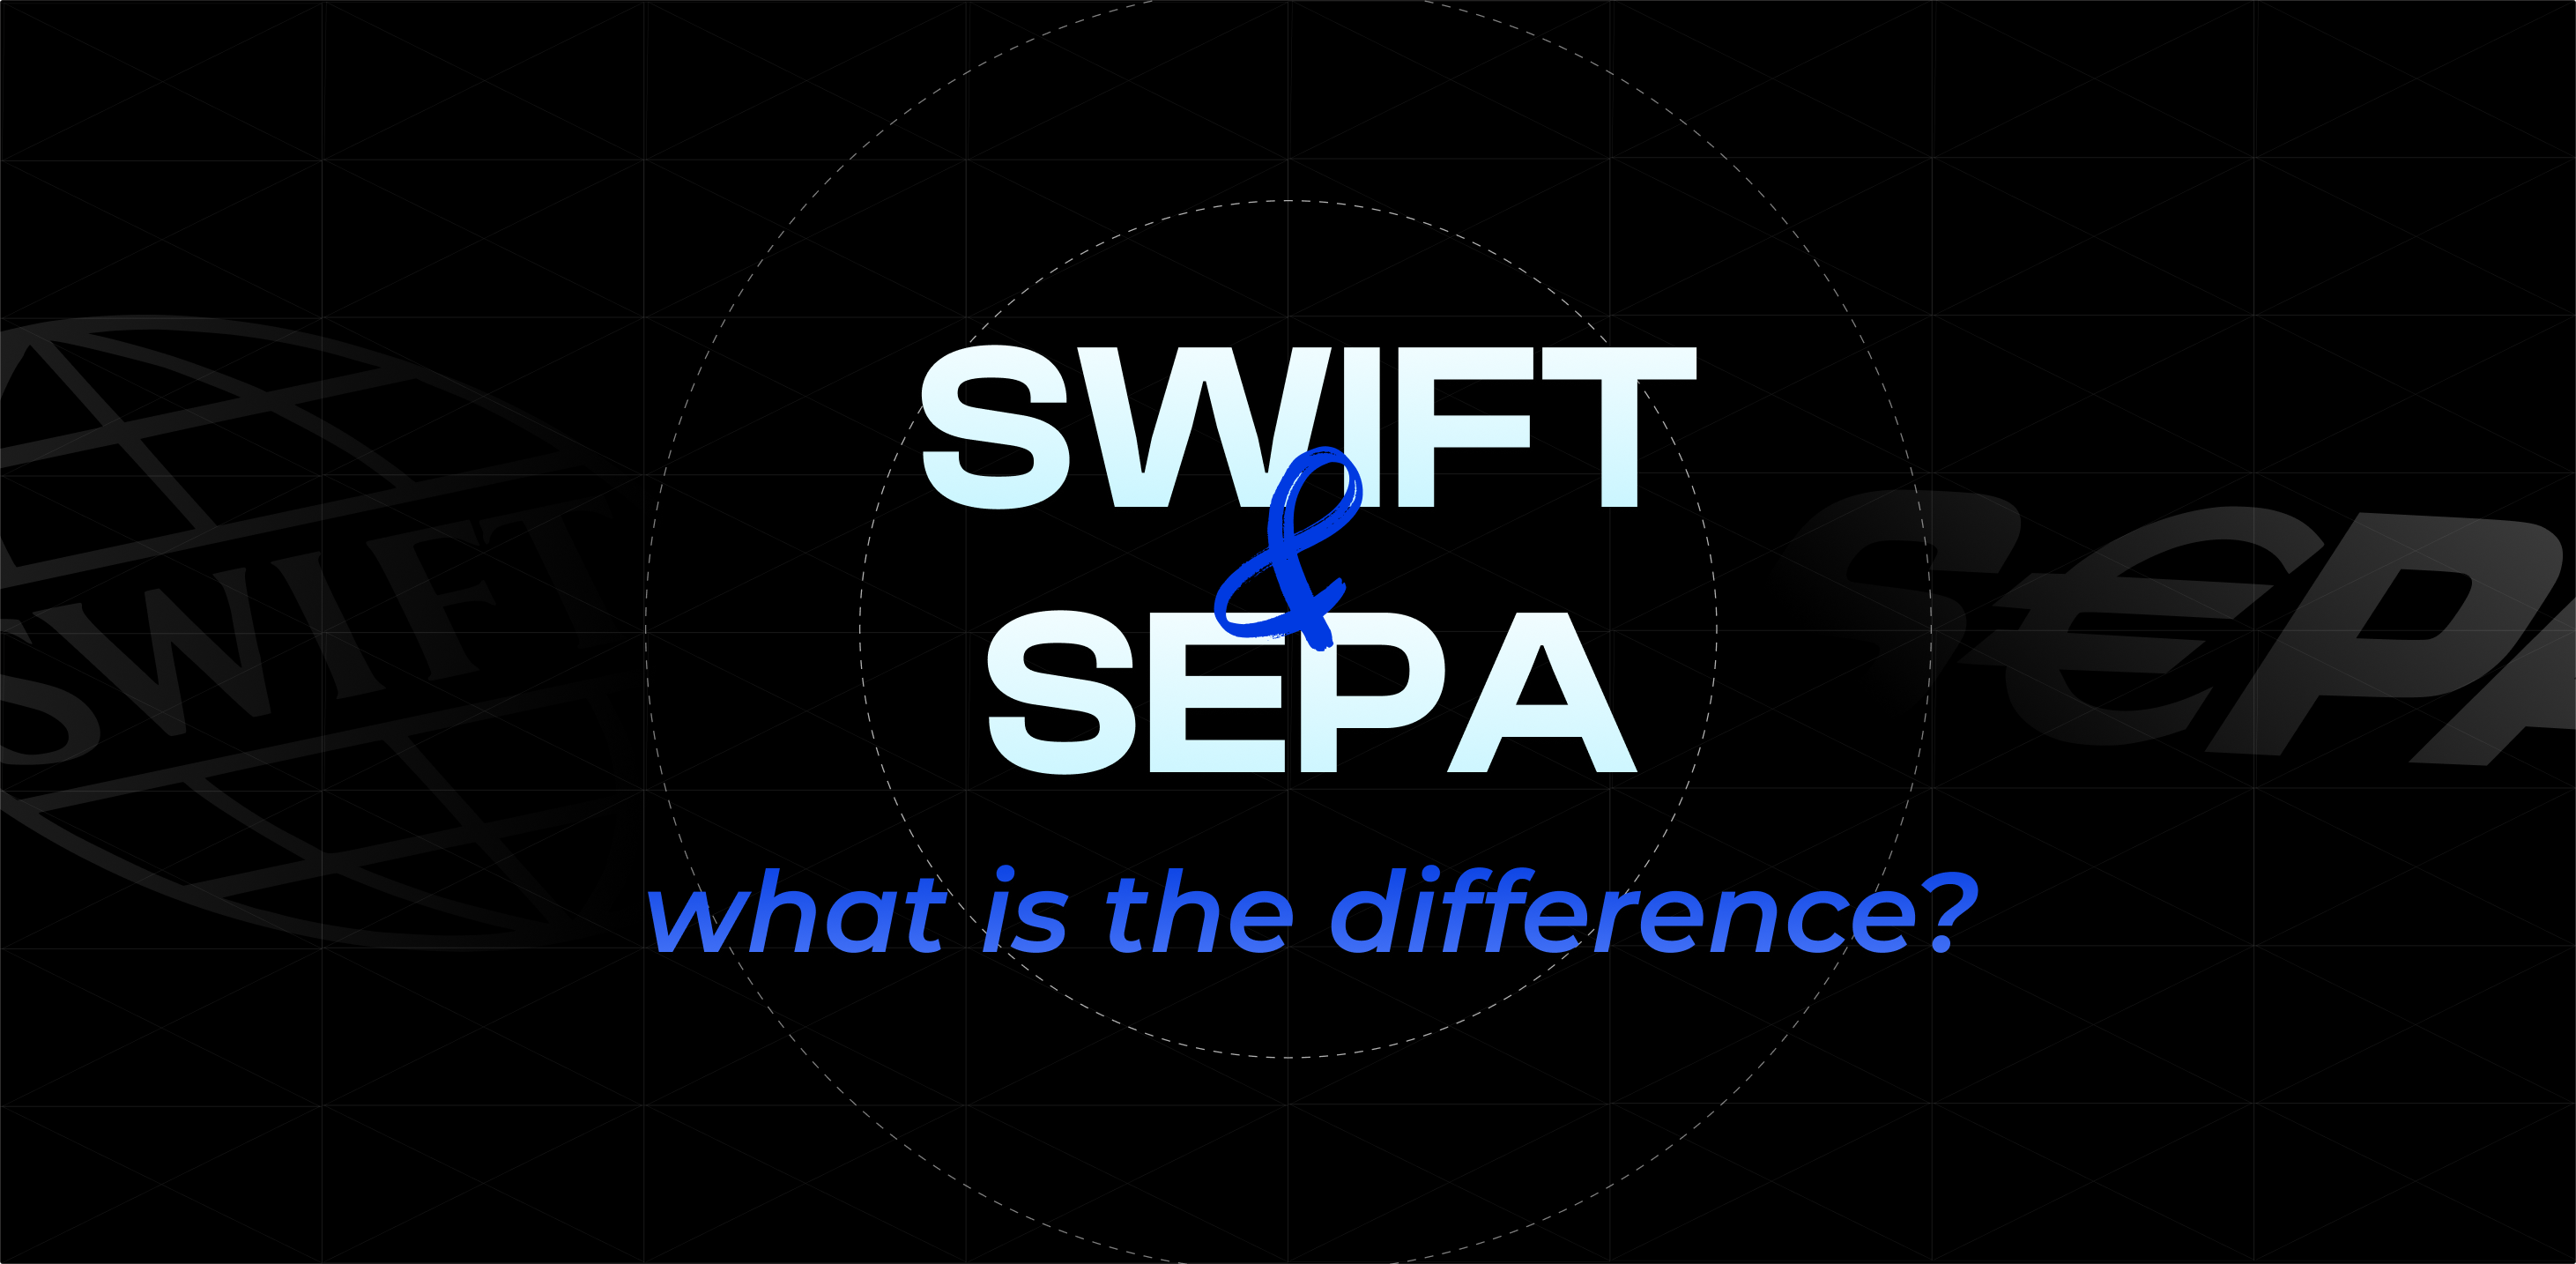 SWIFT & SEPA: what is the difference?